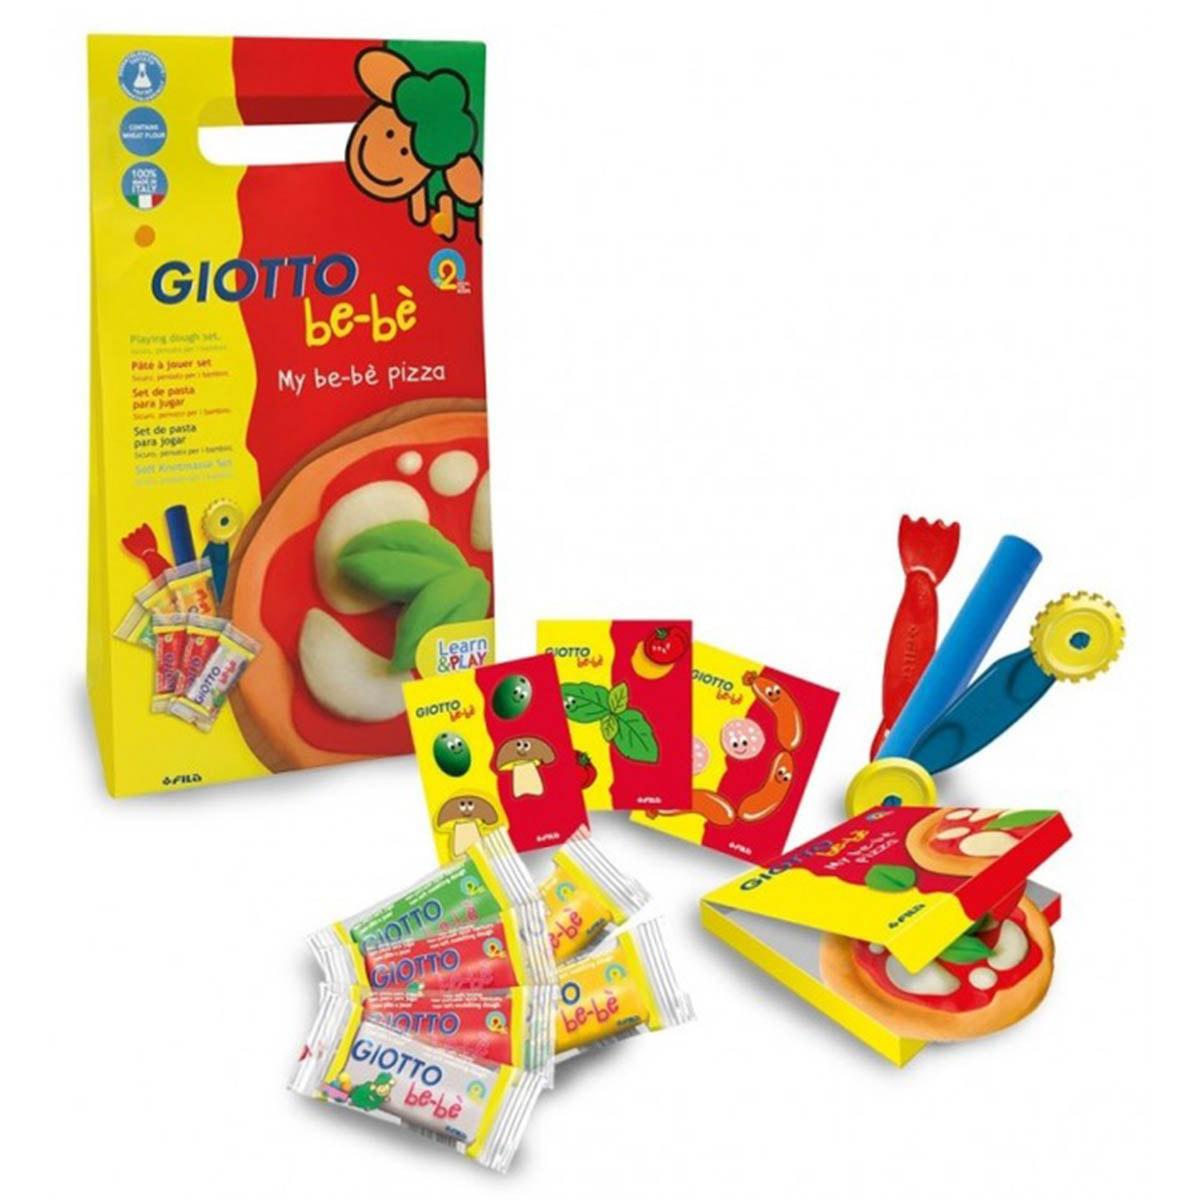 Selected image for GIOTTO Be-bè set Moja pizza 0468400-